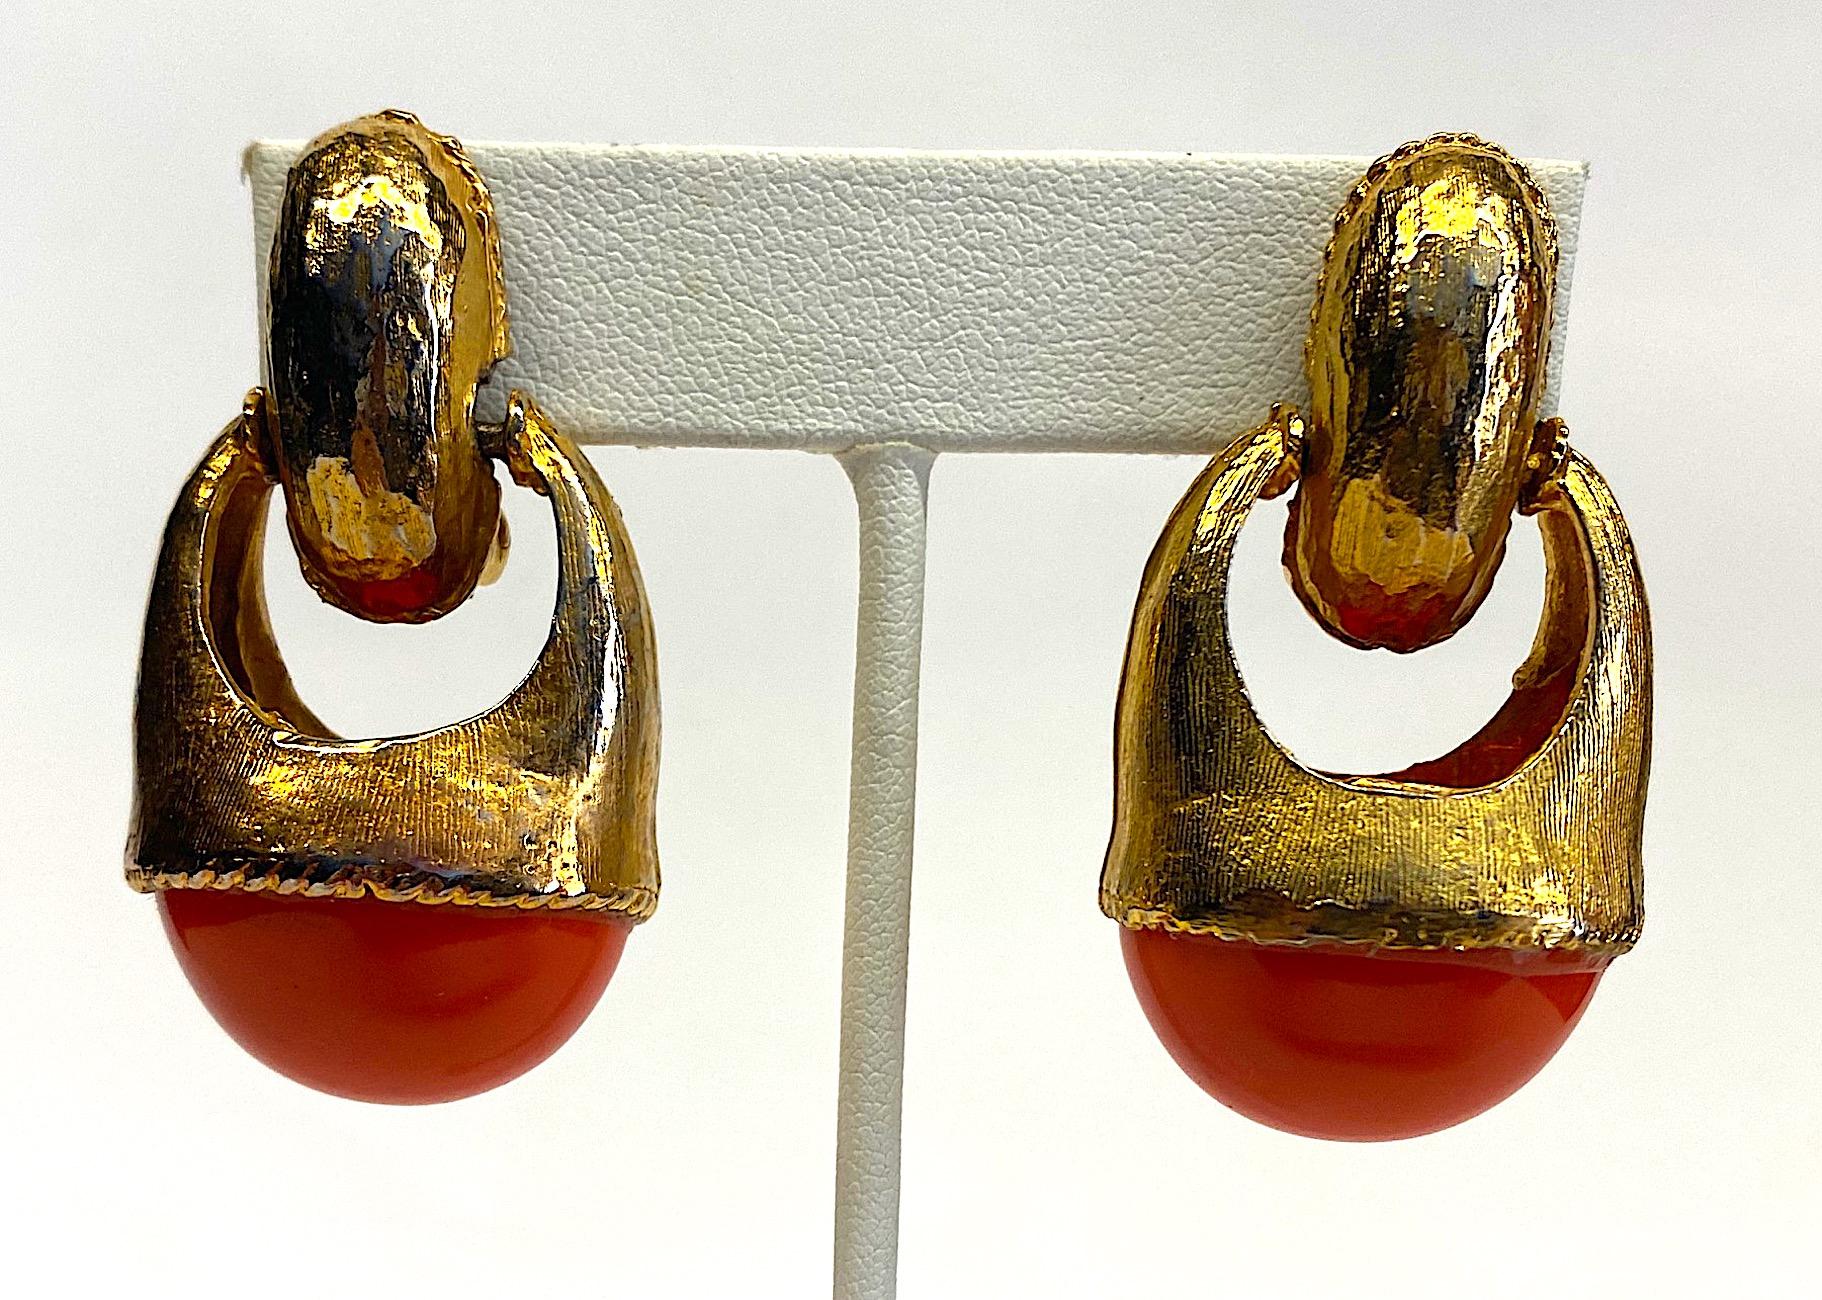 A stylish and chic pair of late 1980s door knocker style dangle earrings in gold plate with large faux coral cabochon. The surface of the earring have tiny lines etched lines etched into them giving the gold tone a soft satin texture and look. The